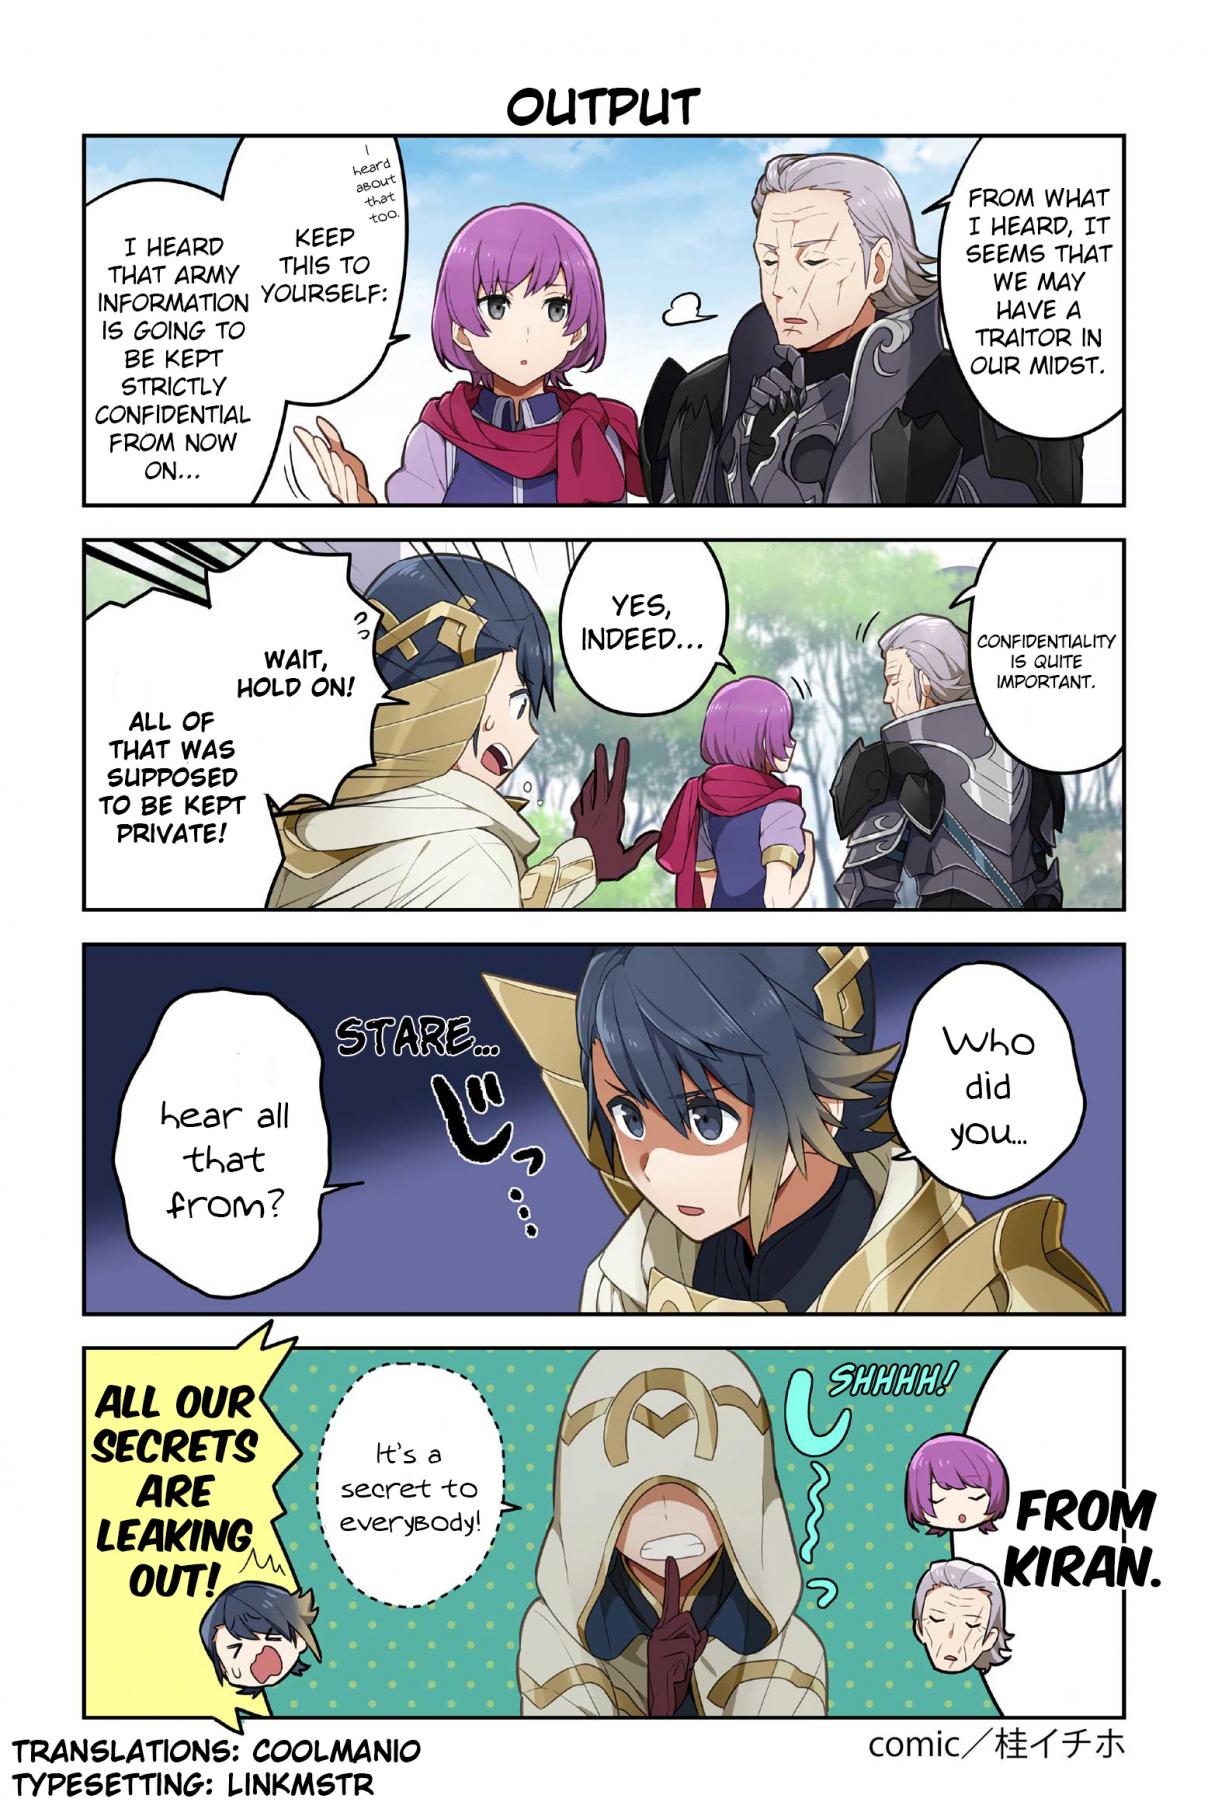 Fire Emblem Heroes: Daily Lives of the Heroes Ch. 66 Output